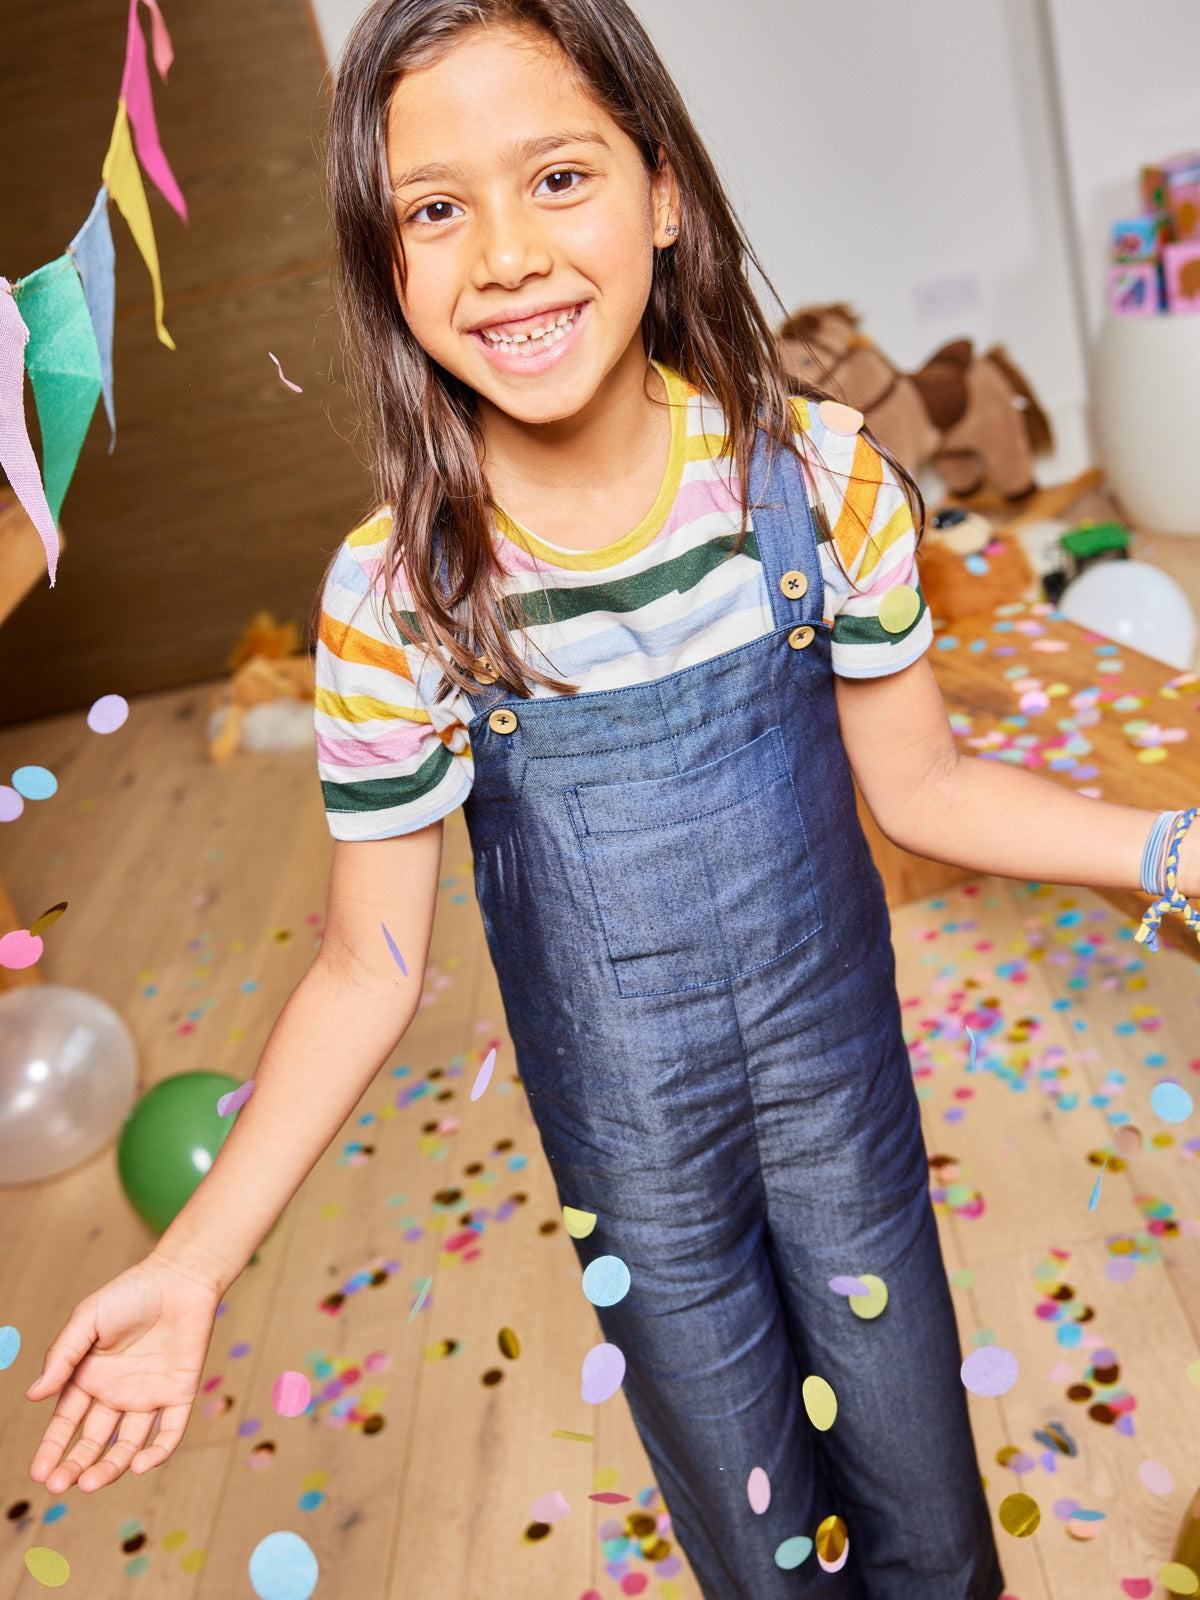 A child wearing the Sofia sustainable kids dungarees, pictured with falling confetti and balloons and smiling at the camera.